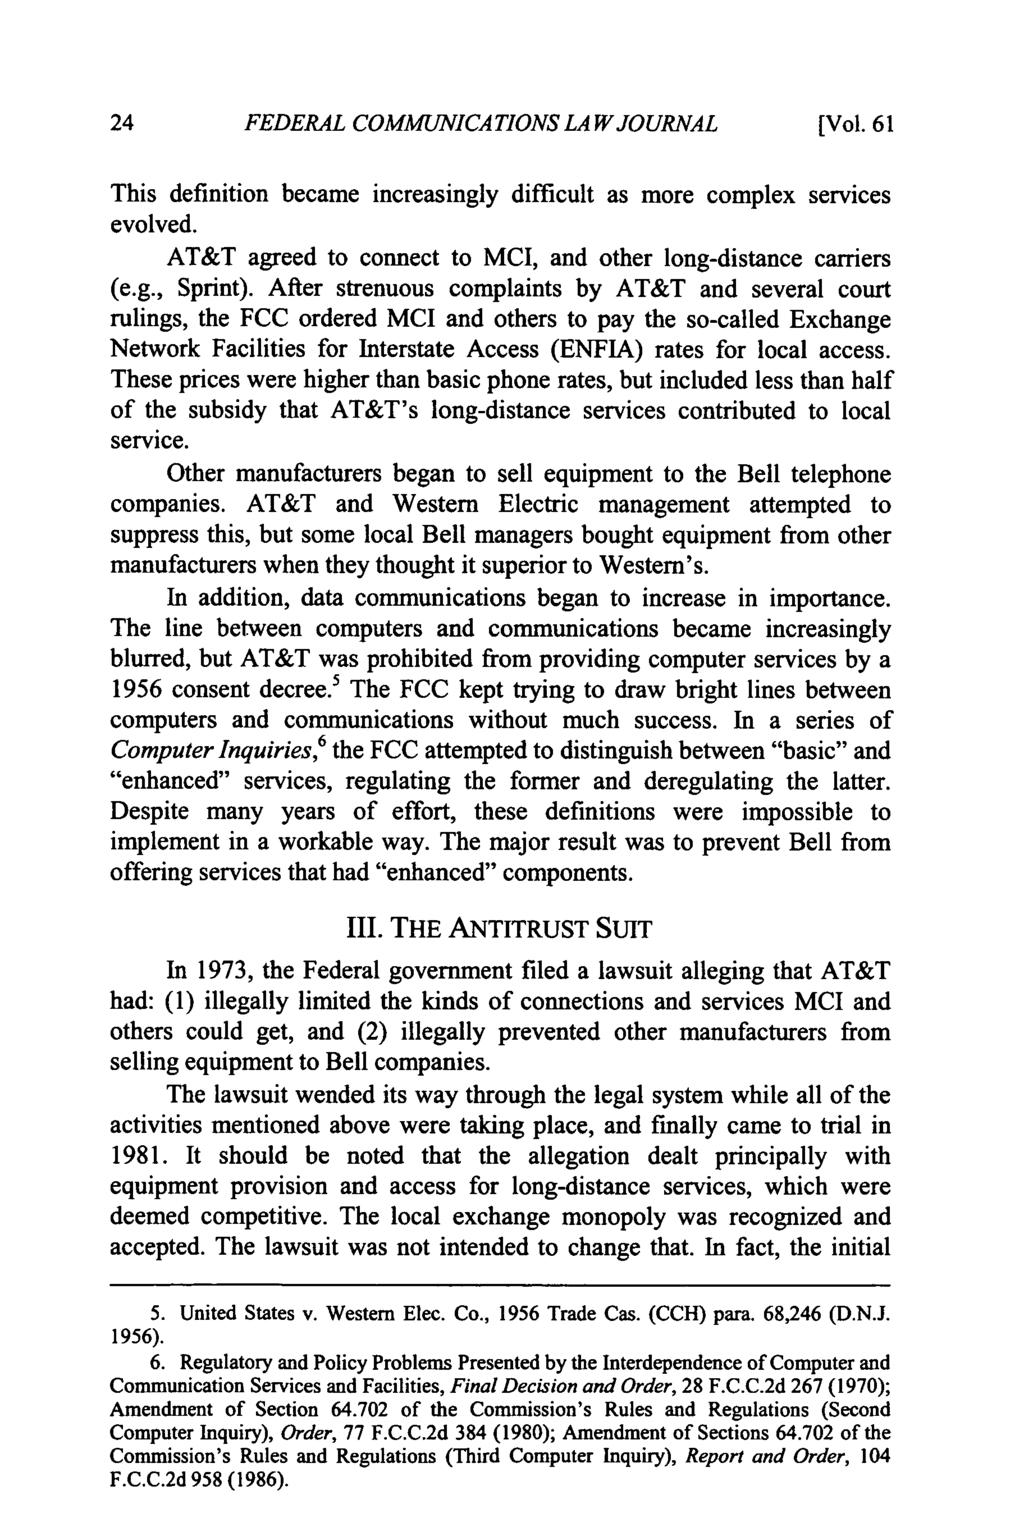 FEDERAL COMMUNICATIONS LAWJOURNAL [Vol. 61 This definition became increasingly difficult as more complex services evolved. AT&T agreed to connect to MCI, and other long-distance carriers (e.g., Sprint).